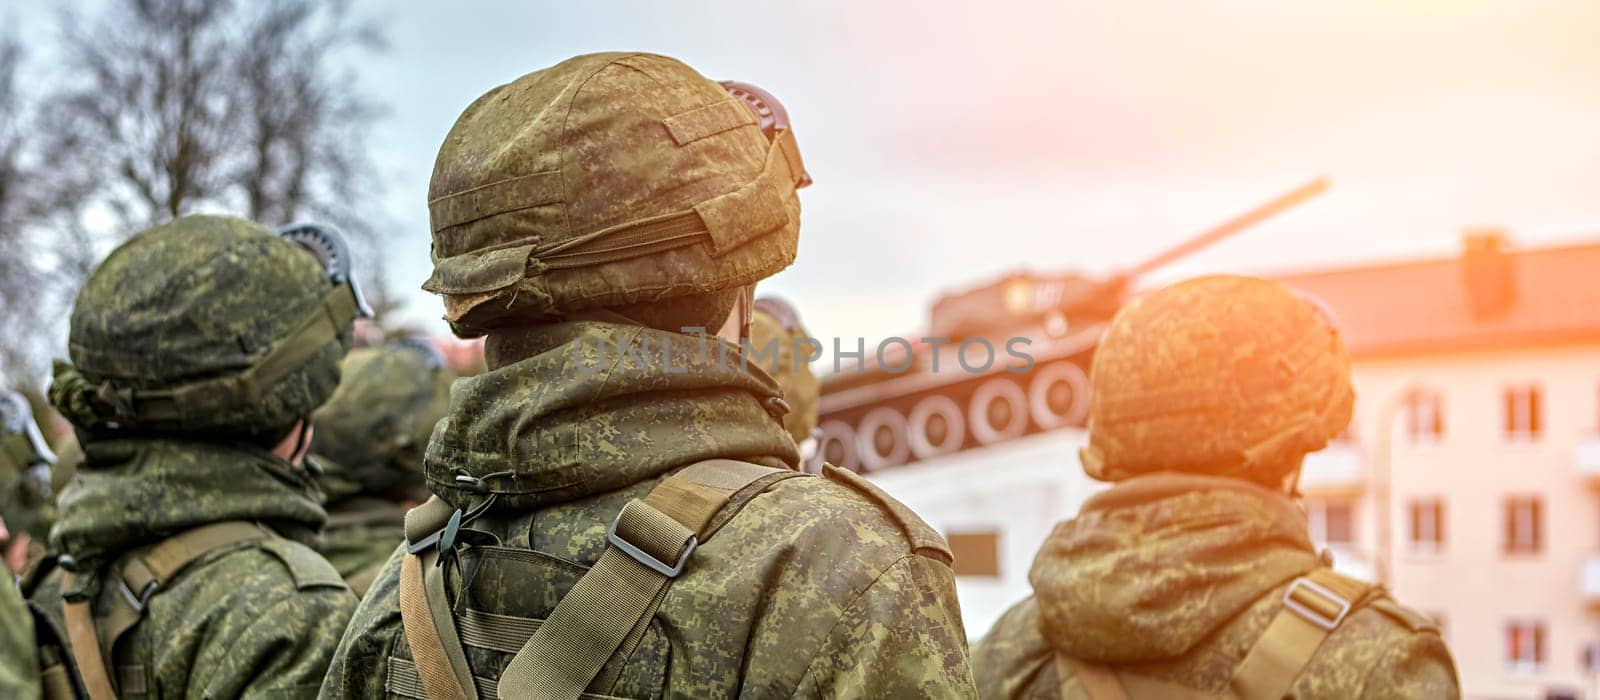 Army Soldiers Standing In A Row Holding Guns In Camouflage Uniforms by Hil